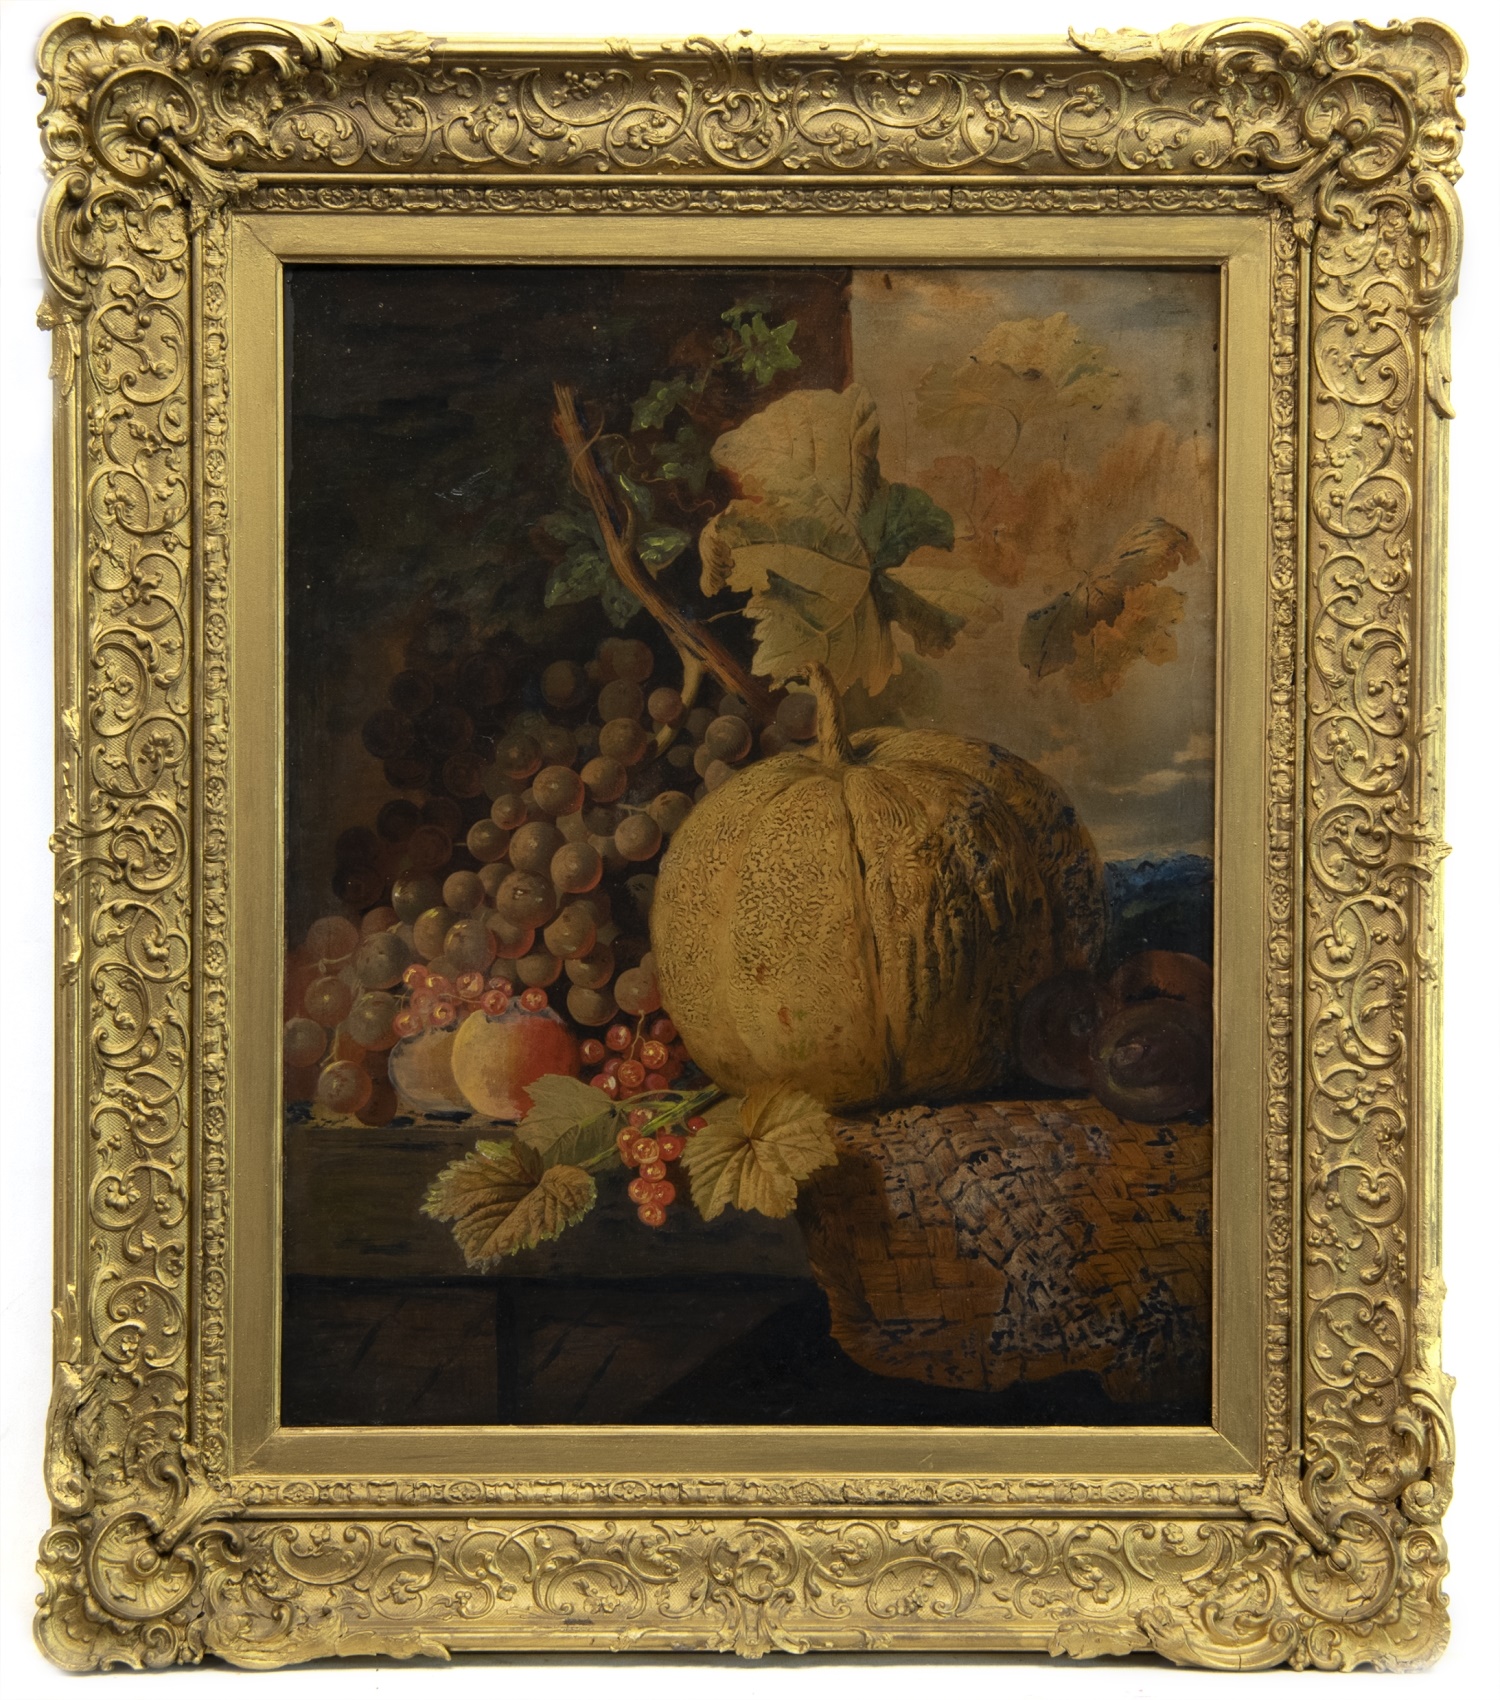 STILL LIFE WITH FRUIT, A CONTINENTAL OIL